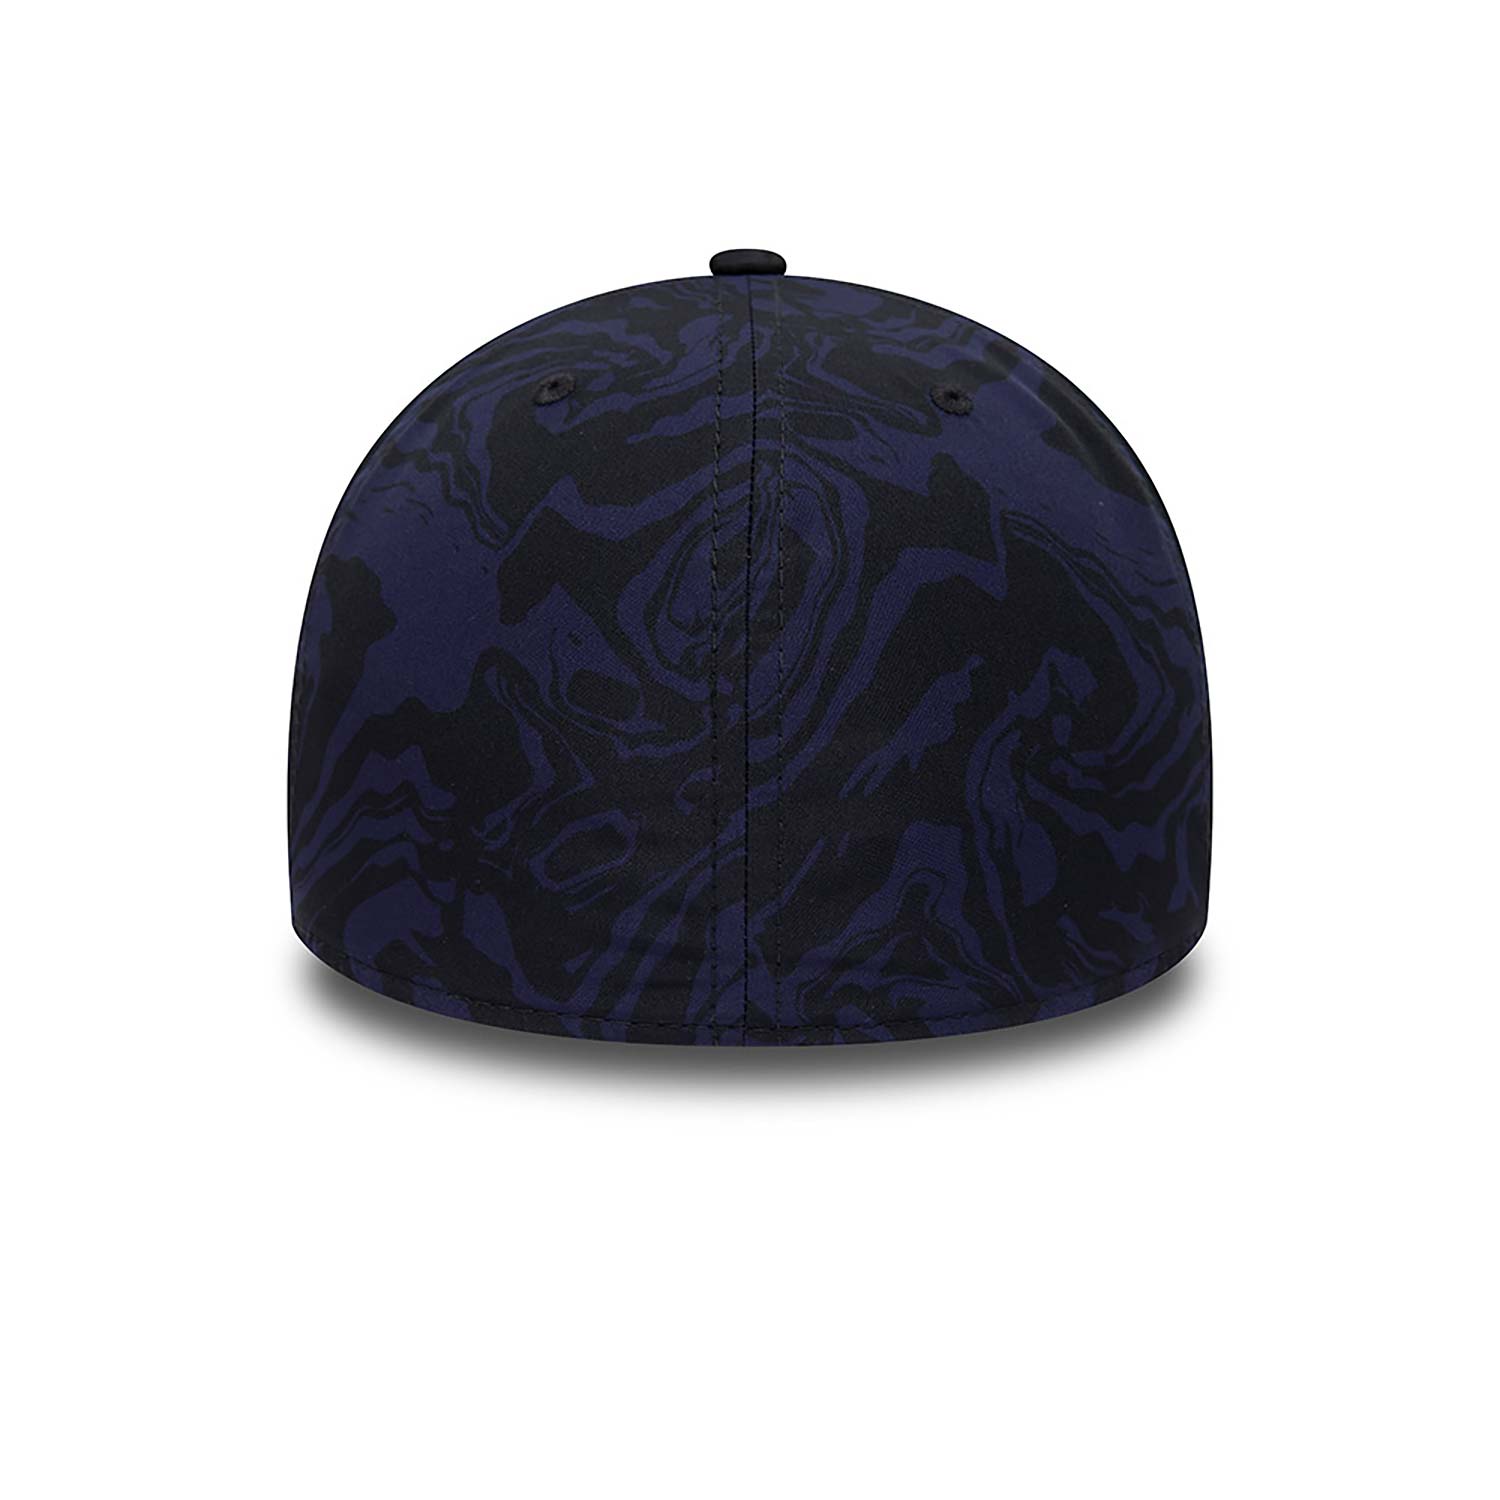 England Rugby All Over Print Navy 39THIRTY Stretch Fit Cap